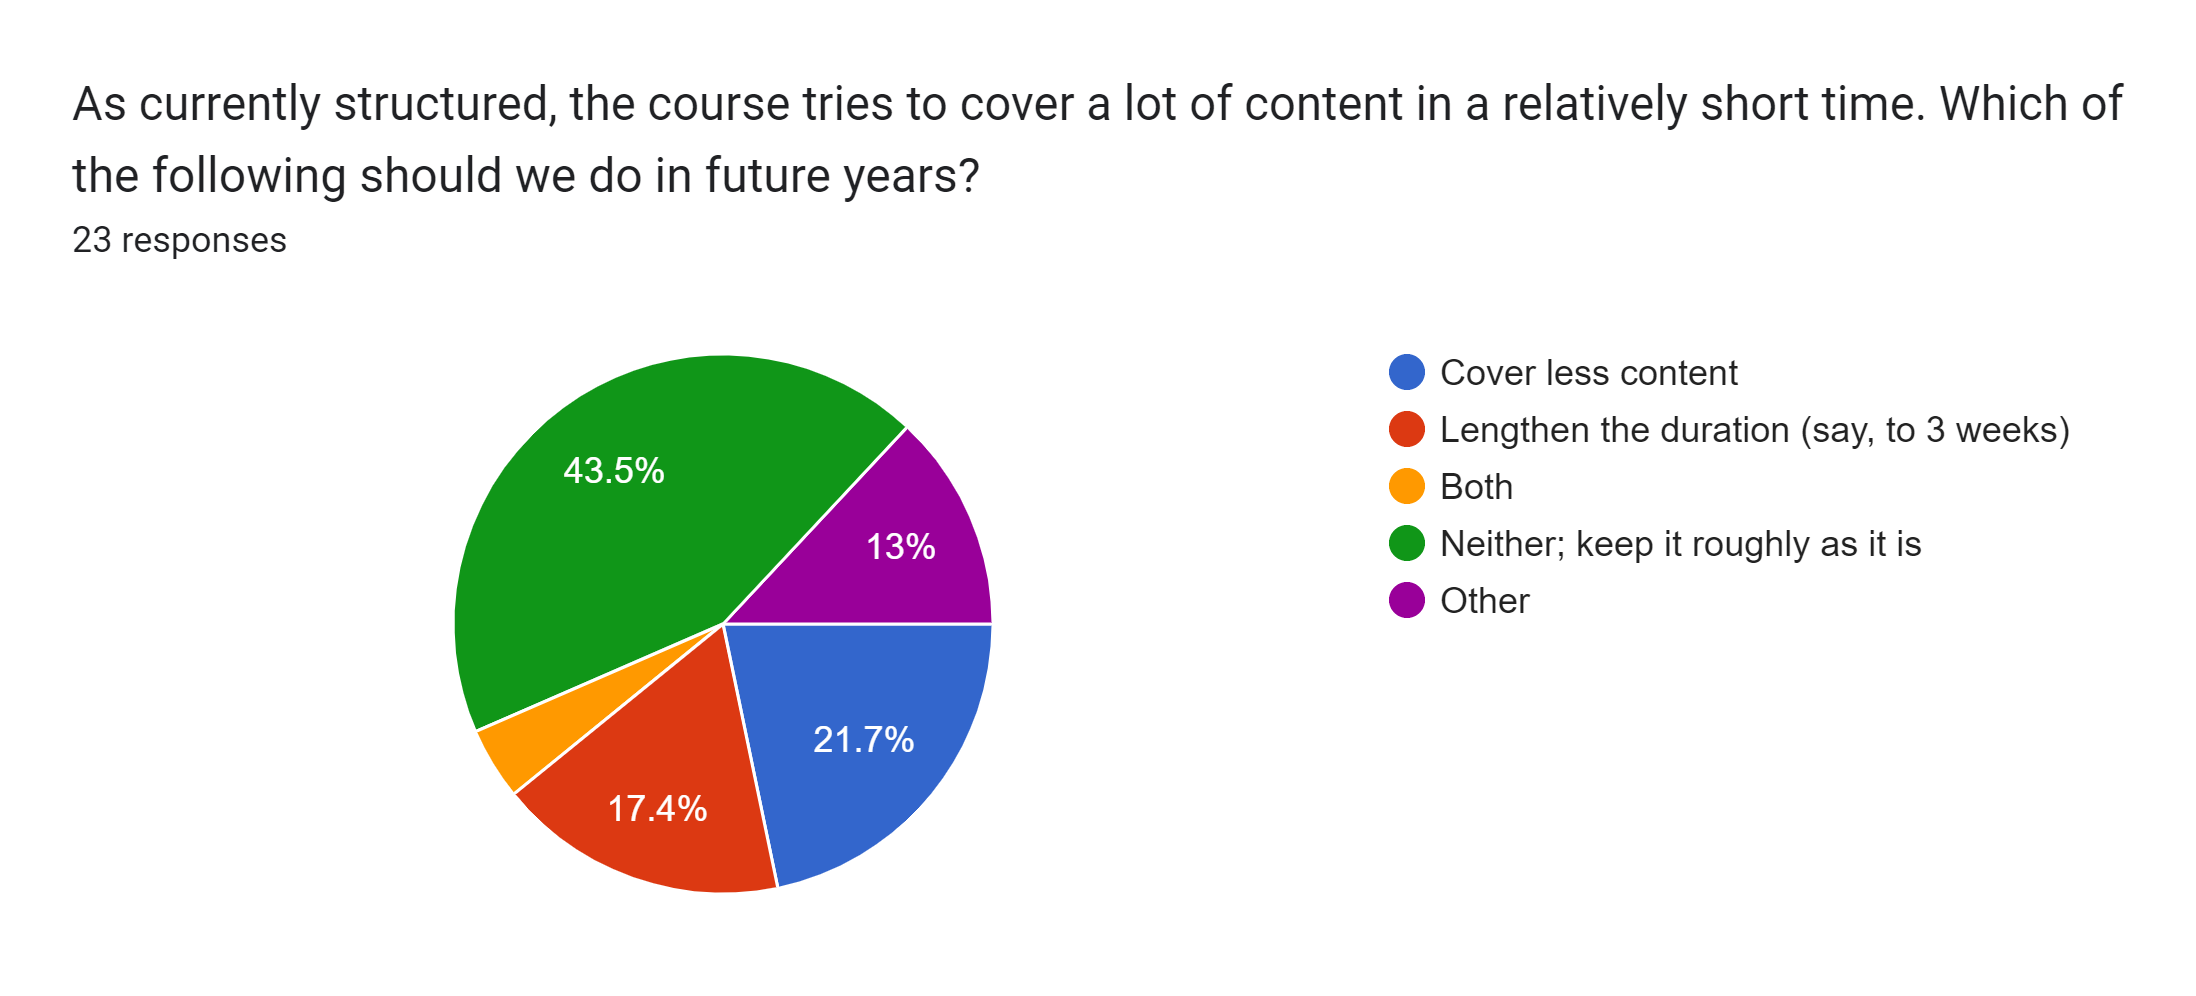 Forms response chart. Question title: As currently structured, the course tries to cover a lot of content in a relatively short time. Which of the following should we do in future years?. Number of responses: 23 responses.